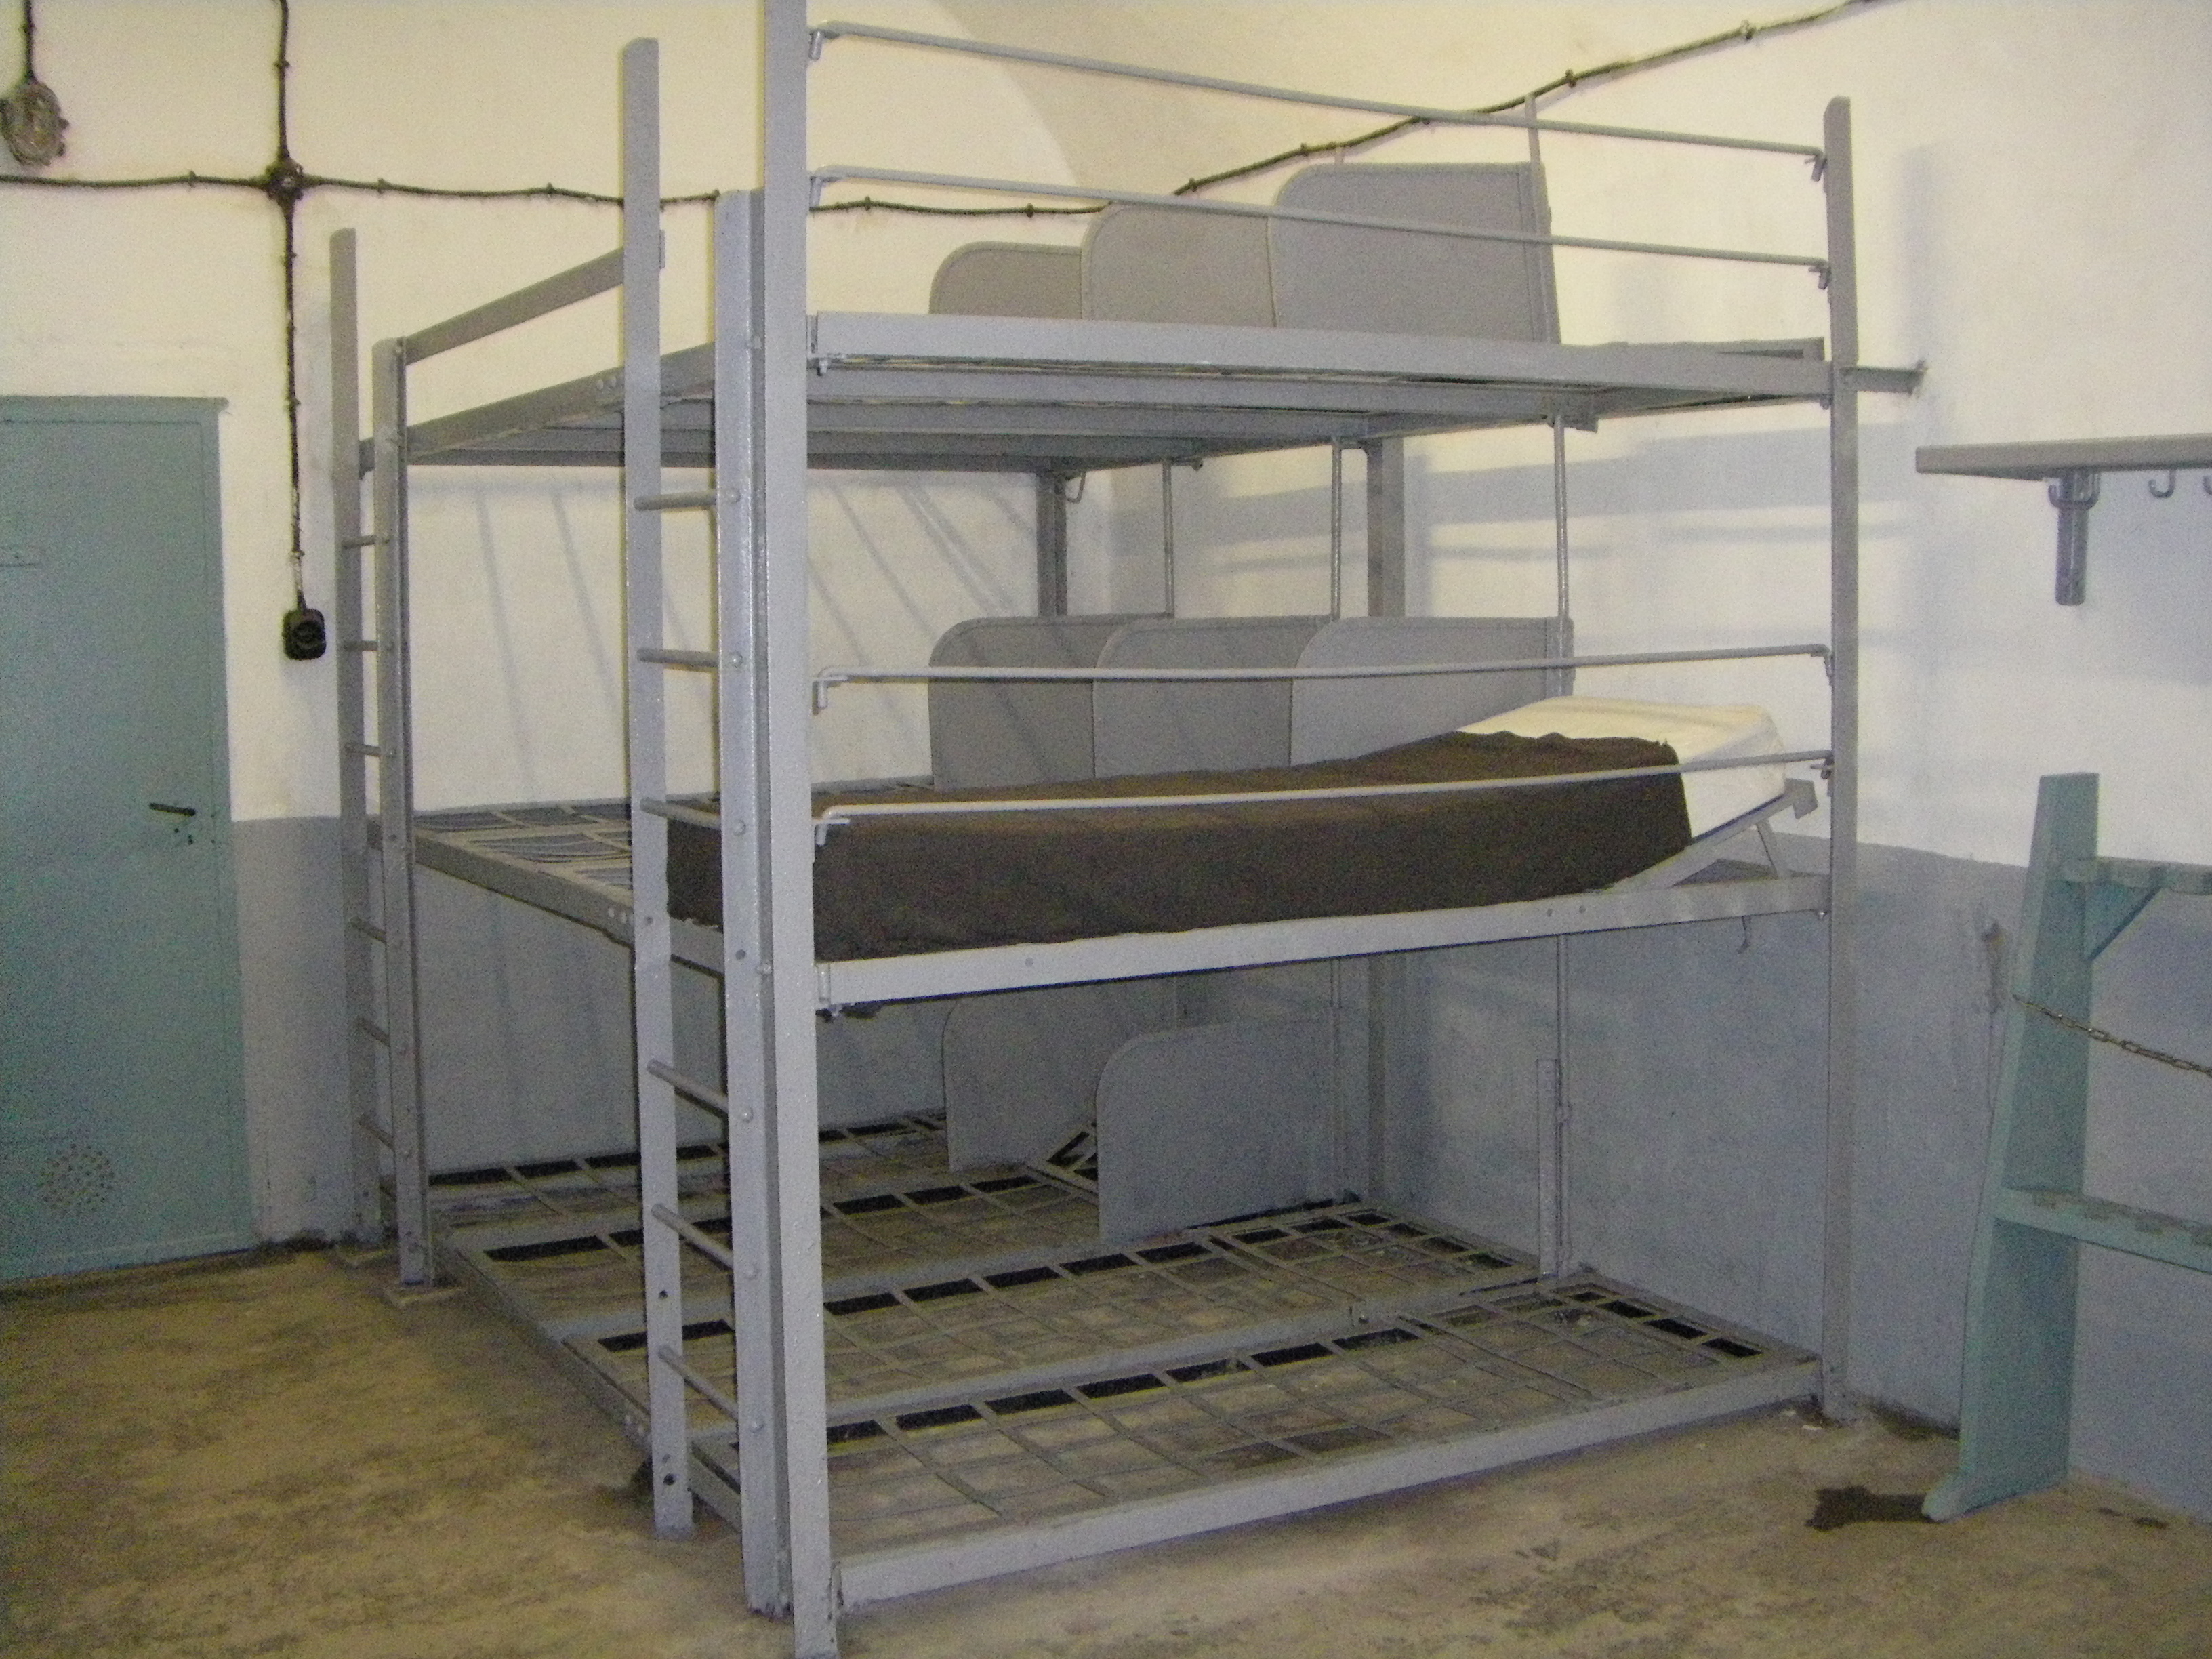 Beds in the troop dormitory